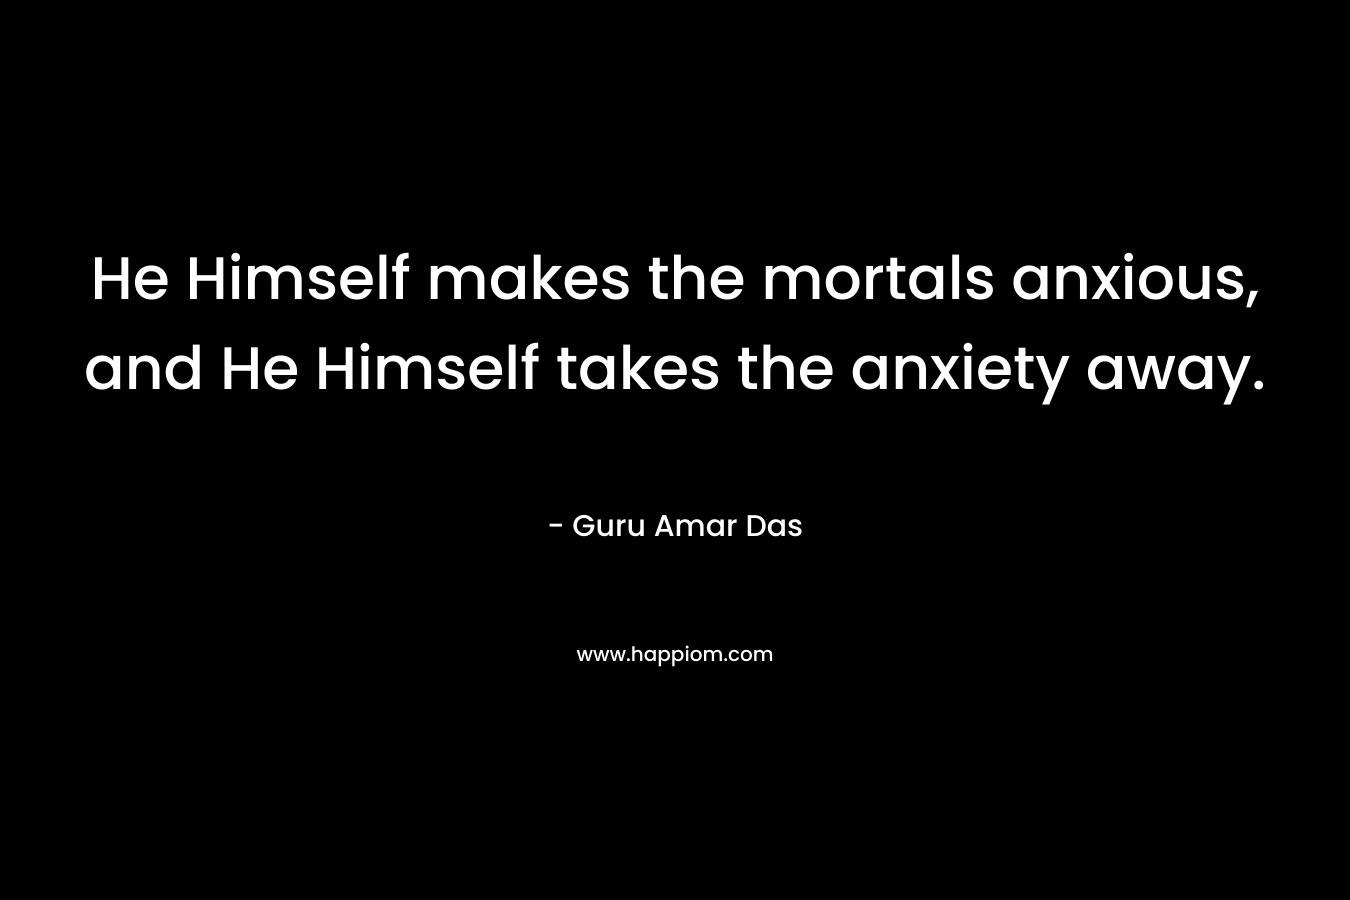 He Himself makes the mortals anxious, and He Himself takes the anxiety away.